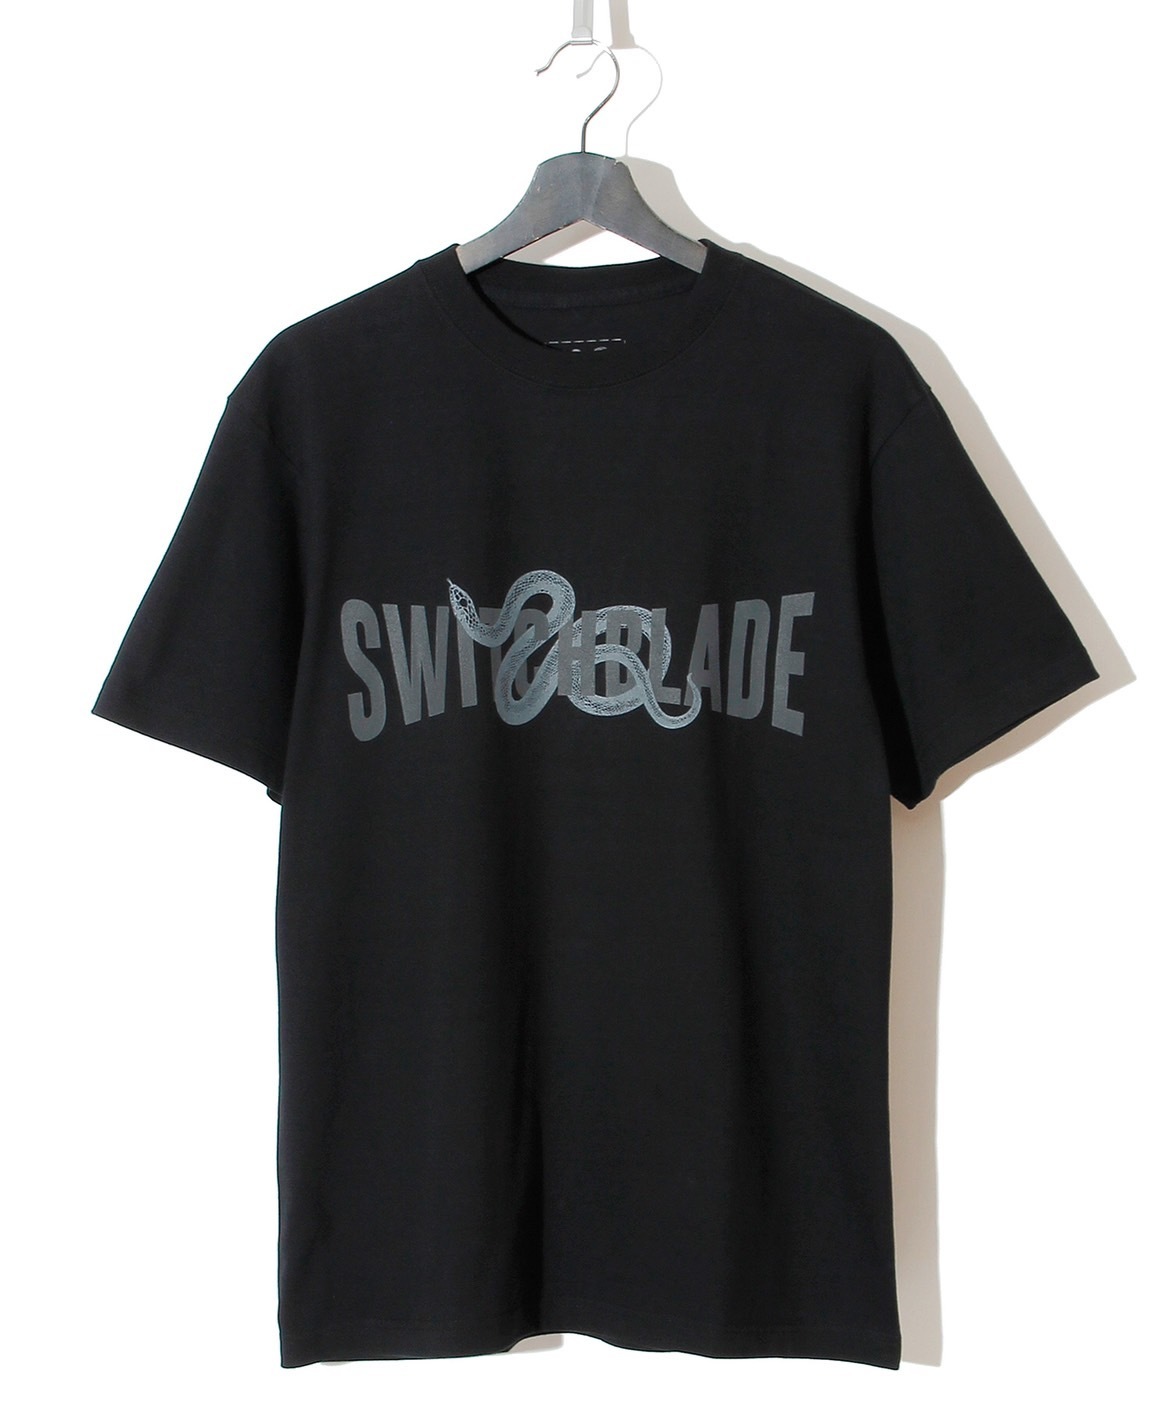 SNAKES AND CURVED LETTERS TEE [BLACK x BLACK]